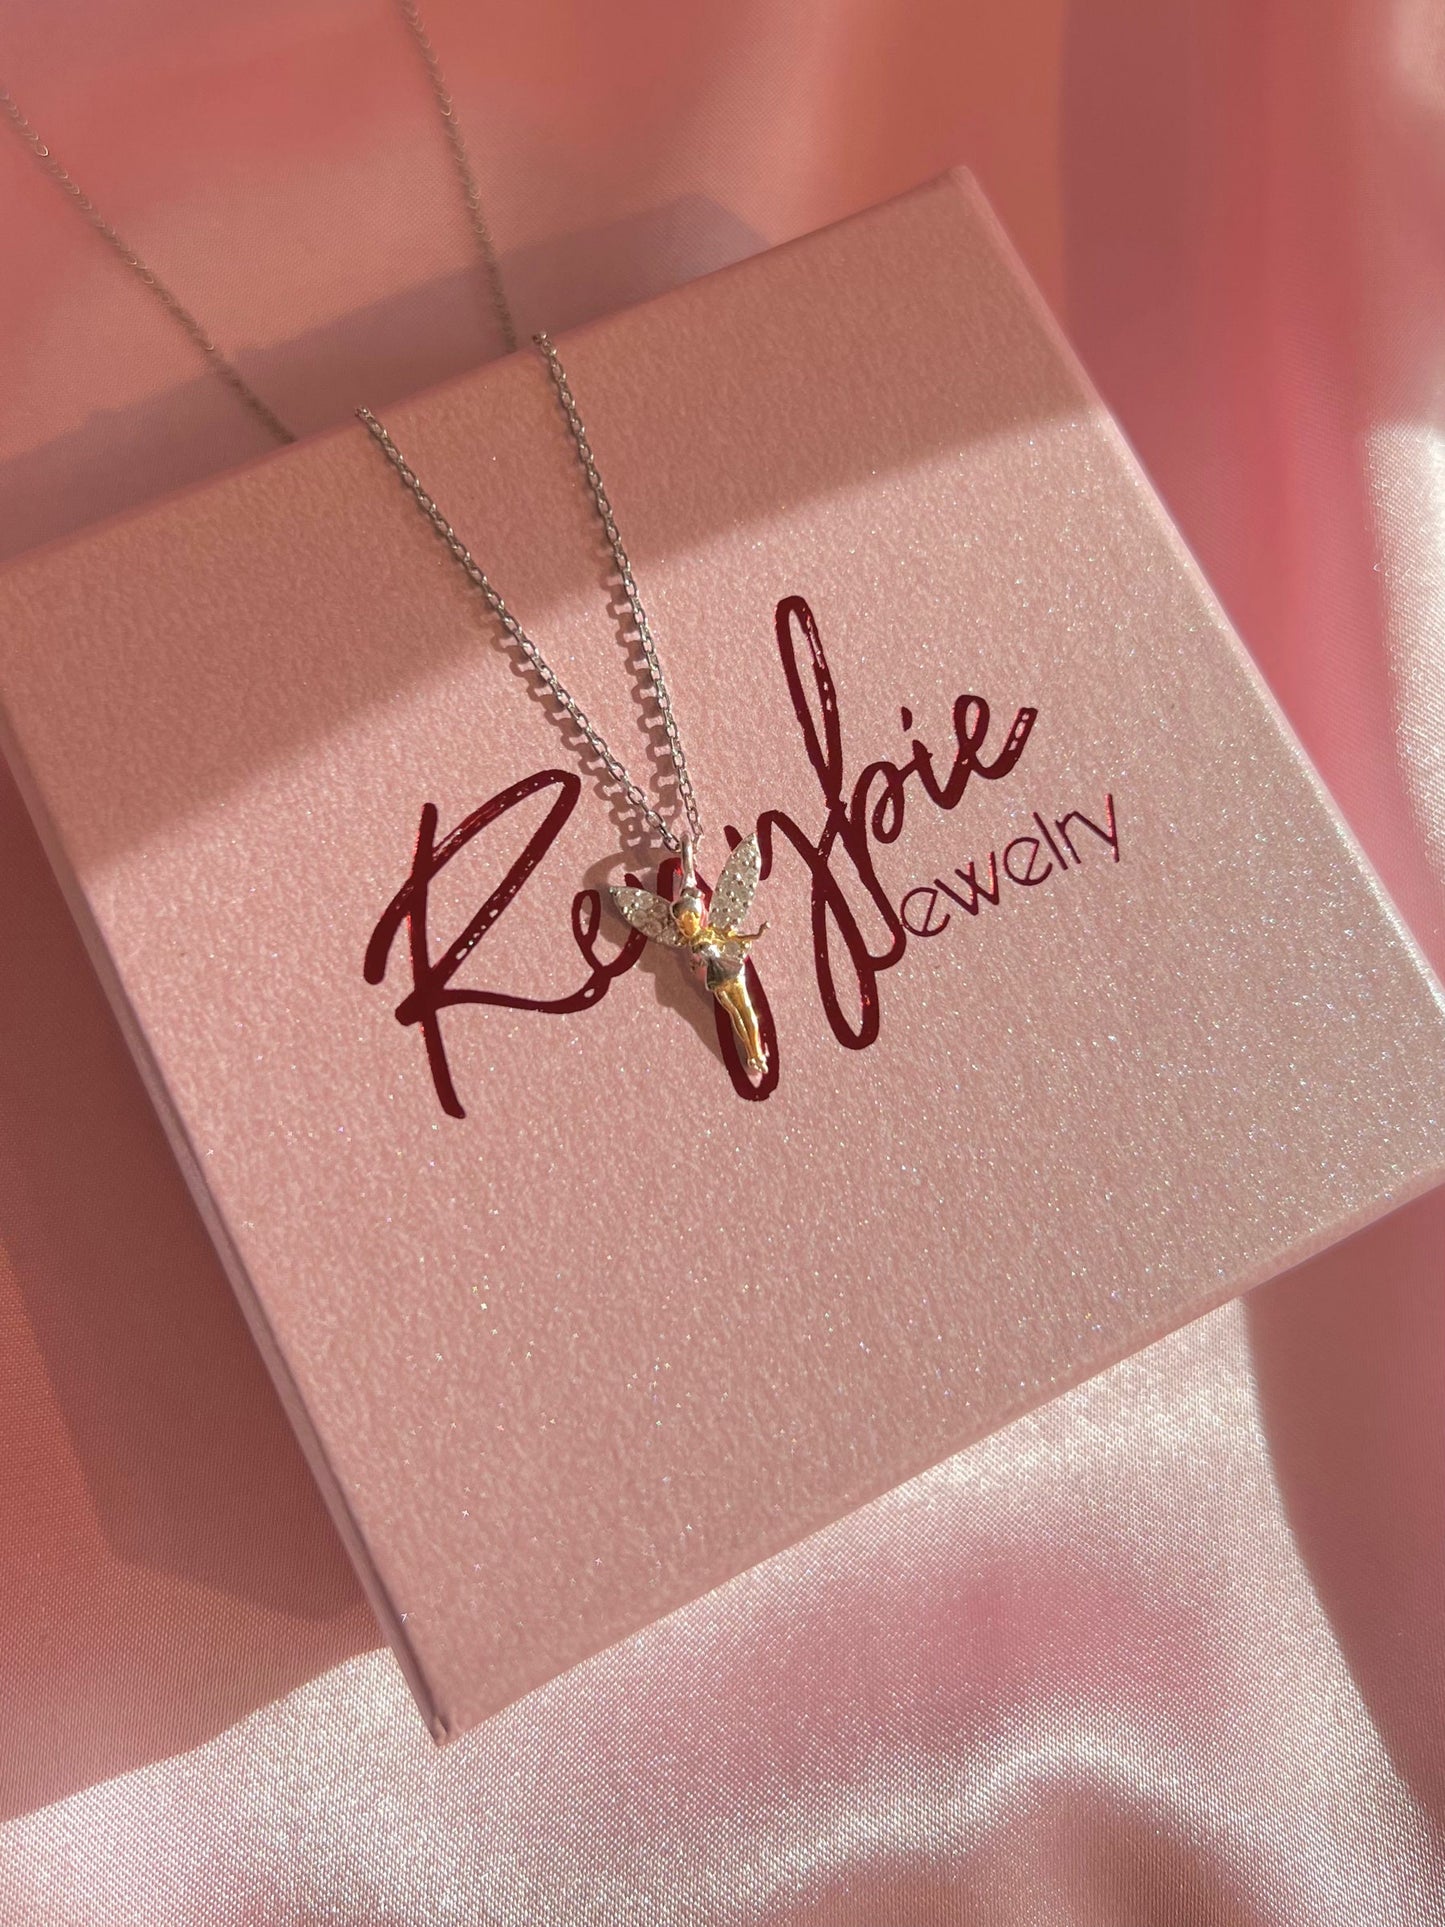 Tinker Bell Fairy Minimalist Necklace, Dainty Tinker Bell Rosetta Protagonists Pendant Gift for Peter Pan lover -925 Sterling Silver